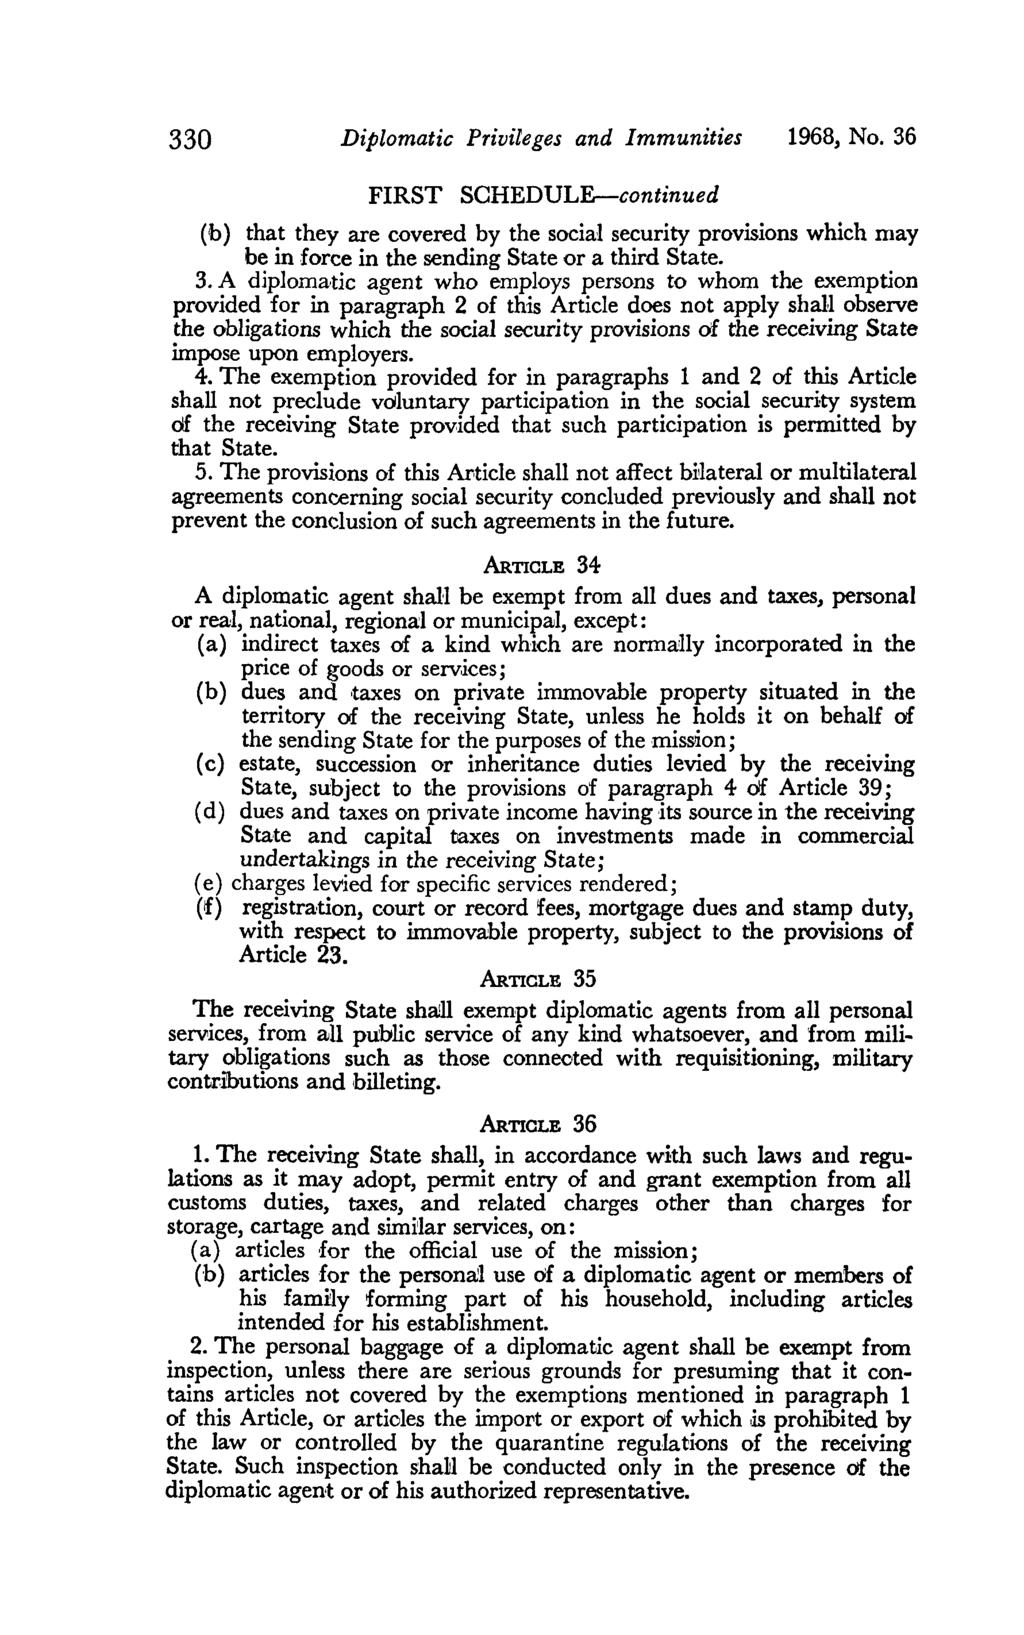 330 Diplomatic Privileges and Immunities 1968, No. 36 FIRST SCHEDULE-continued (b) that they are covered by the social security provisions which may be in force in the sending State or a third State.